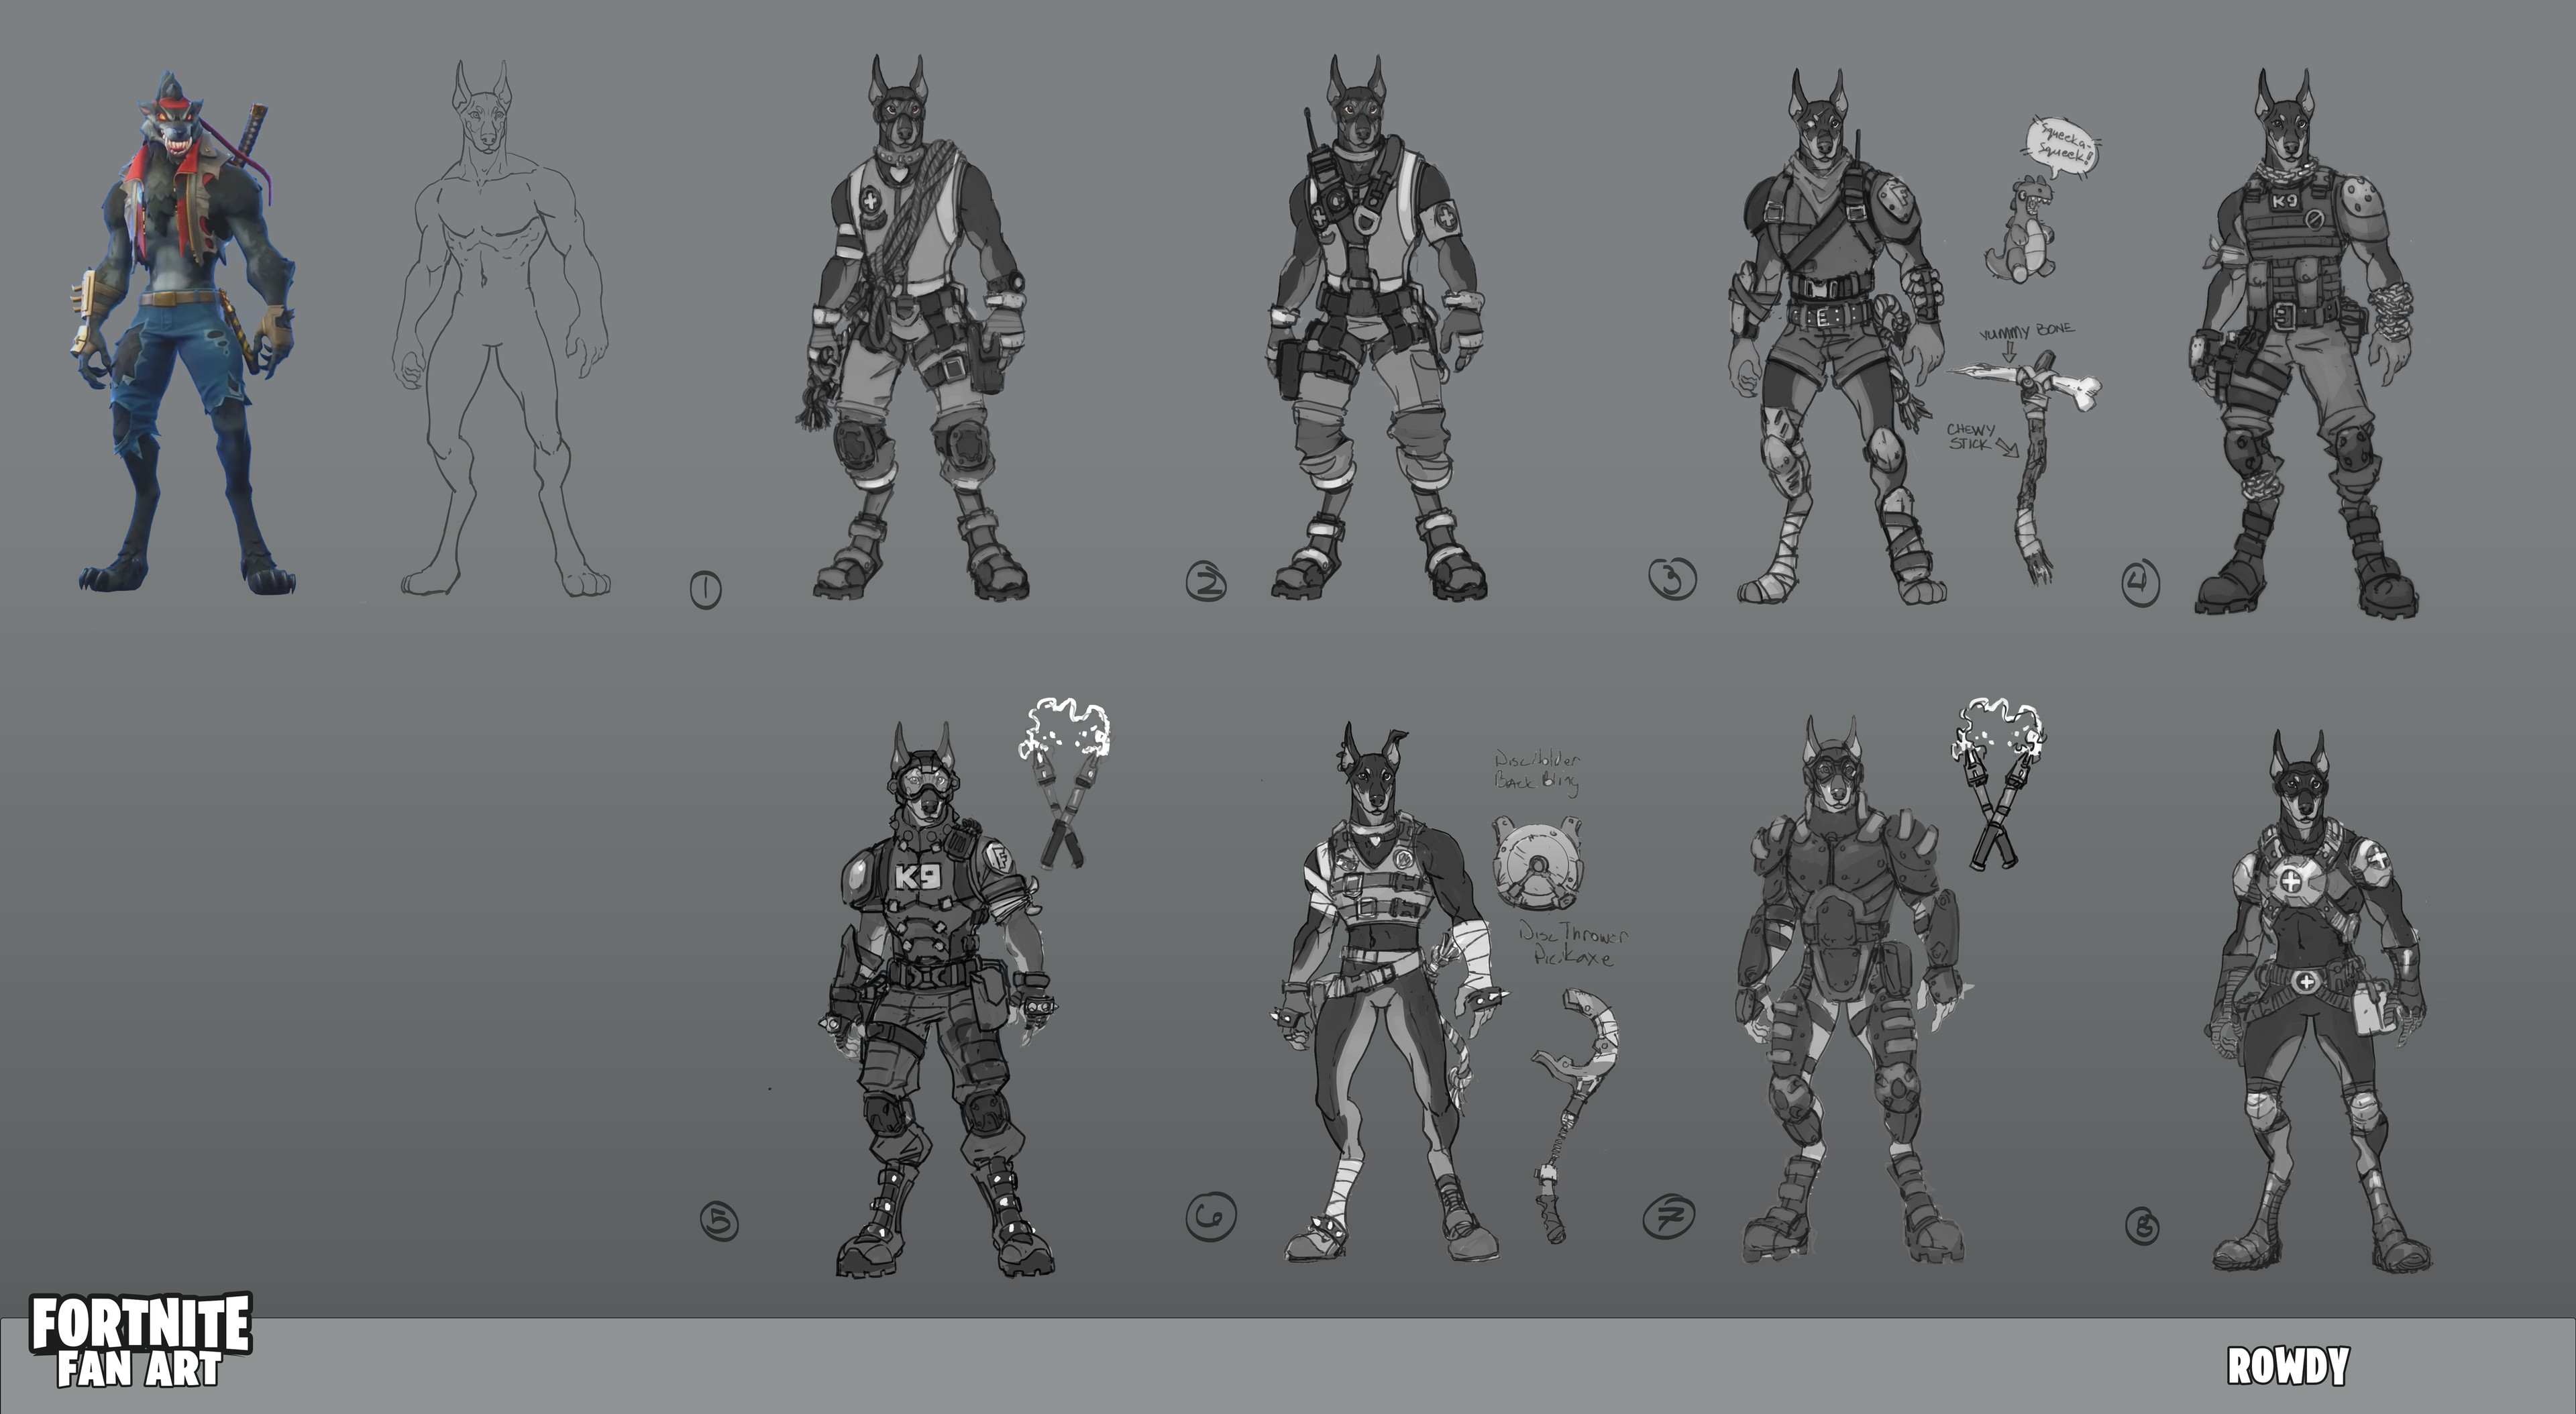 Grayscale iterations